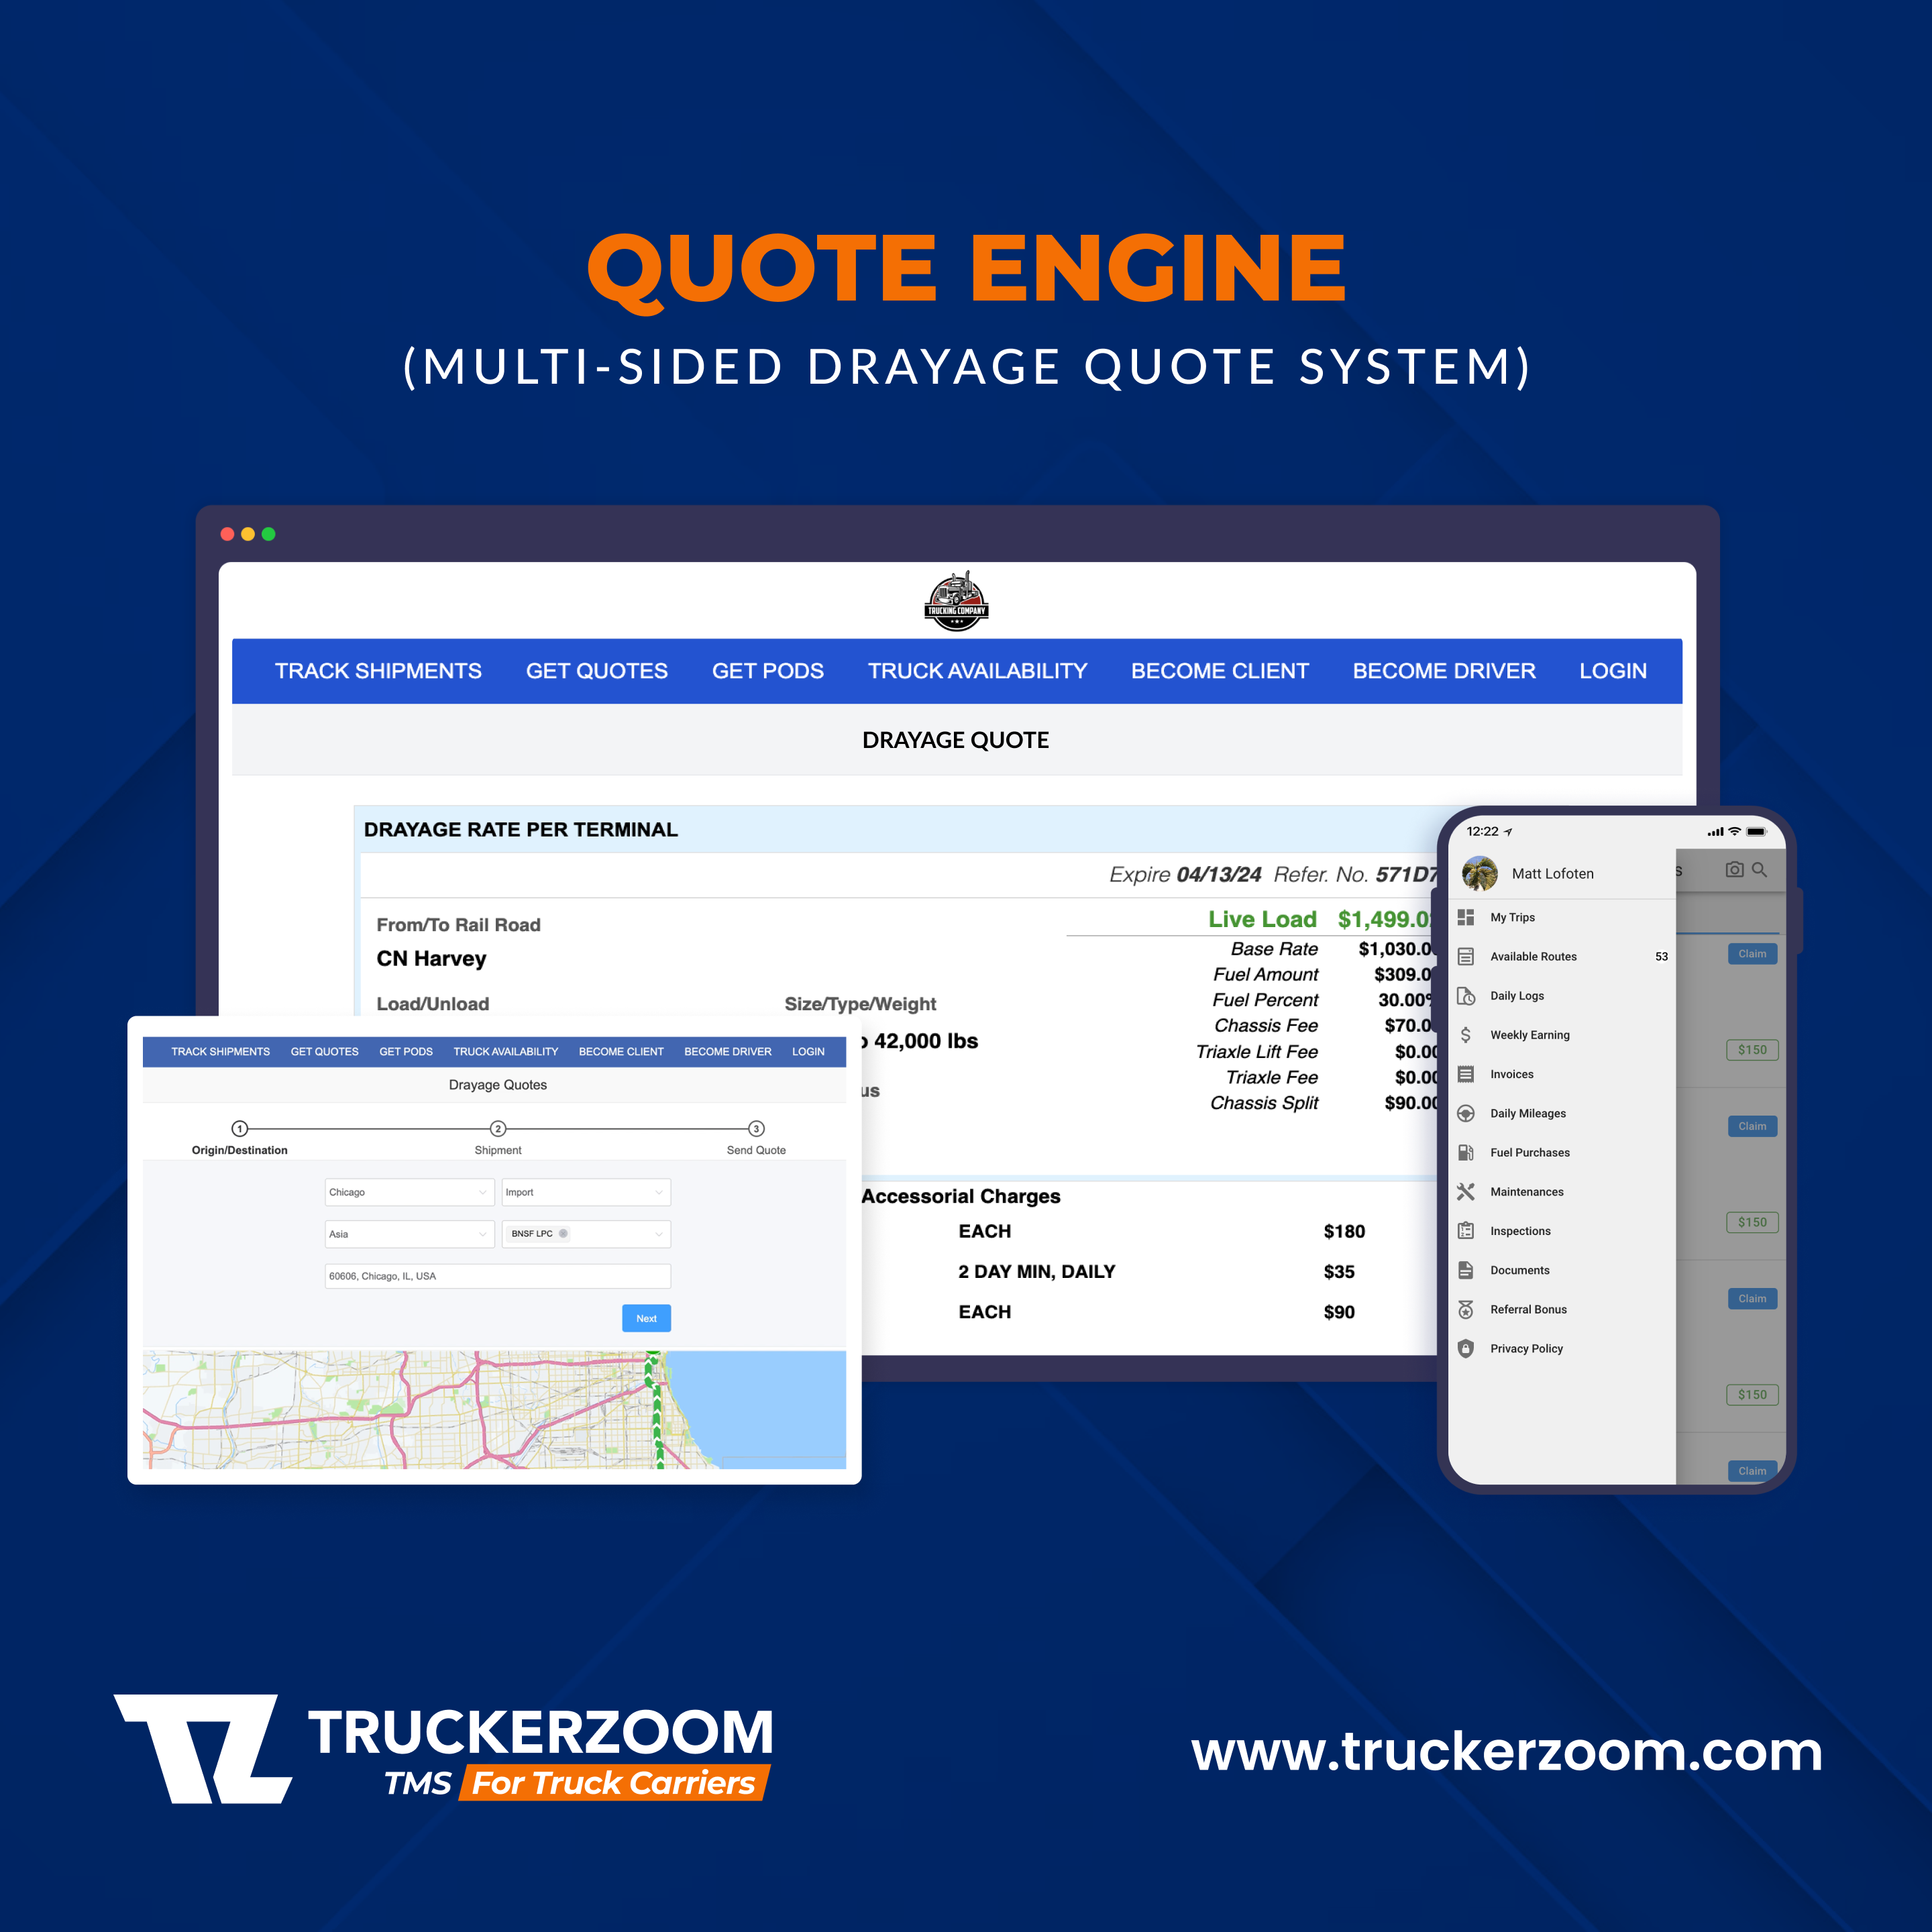 Multi-sided drayage quote management system